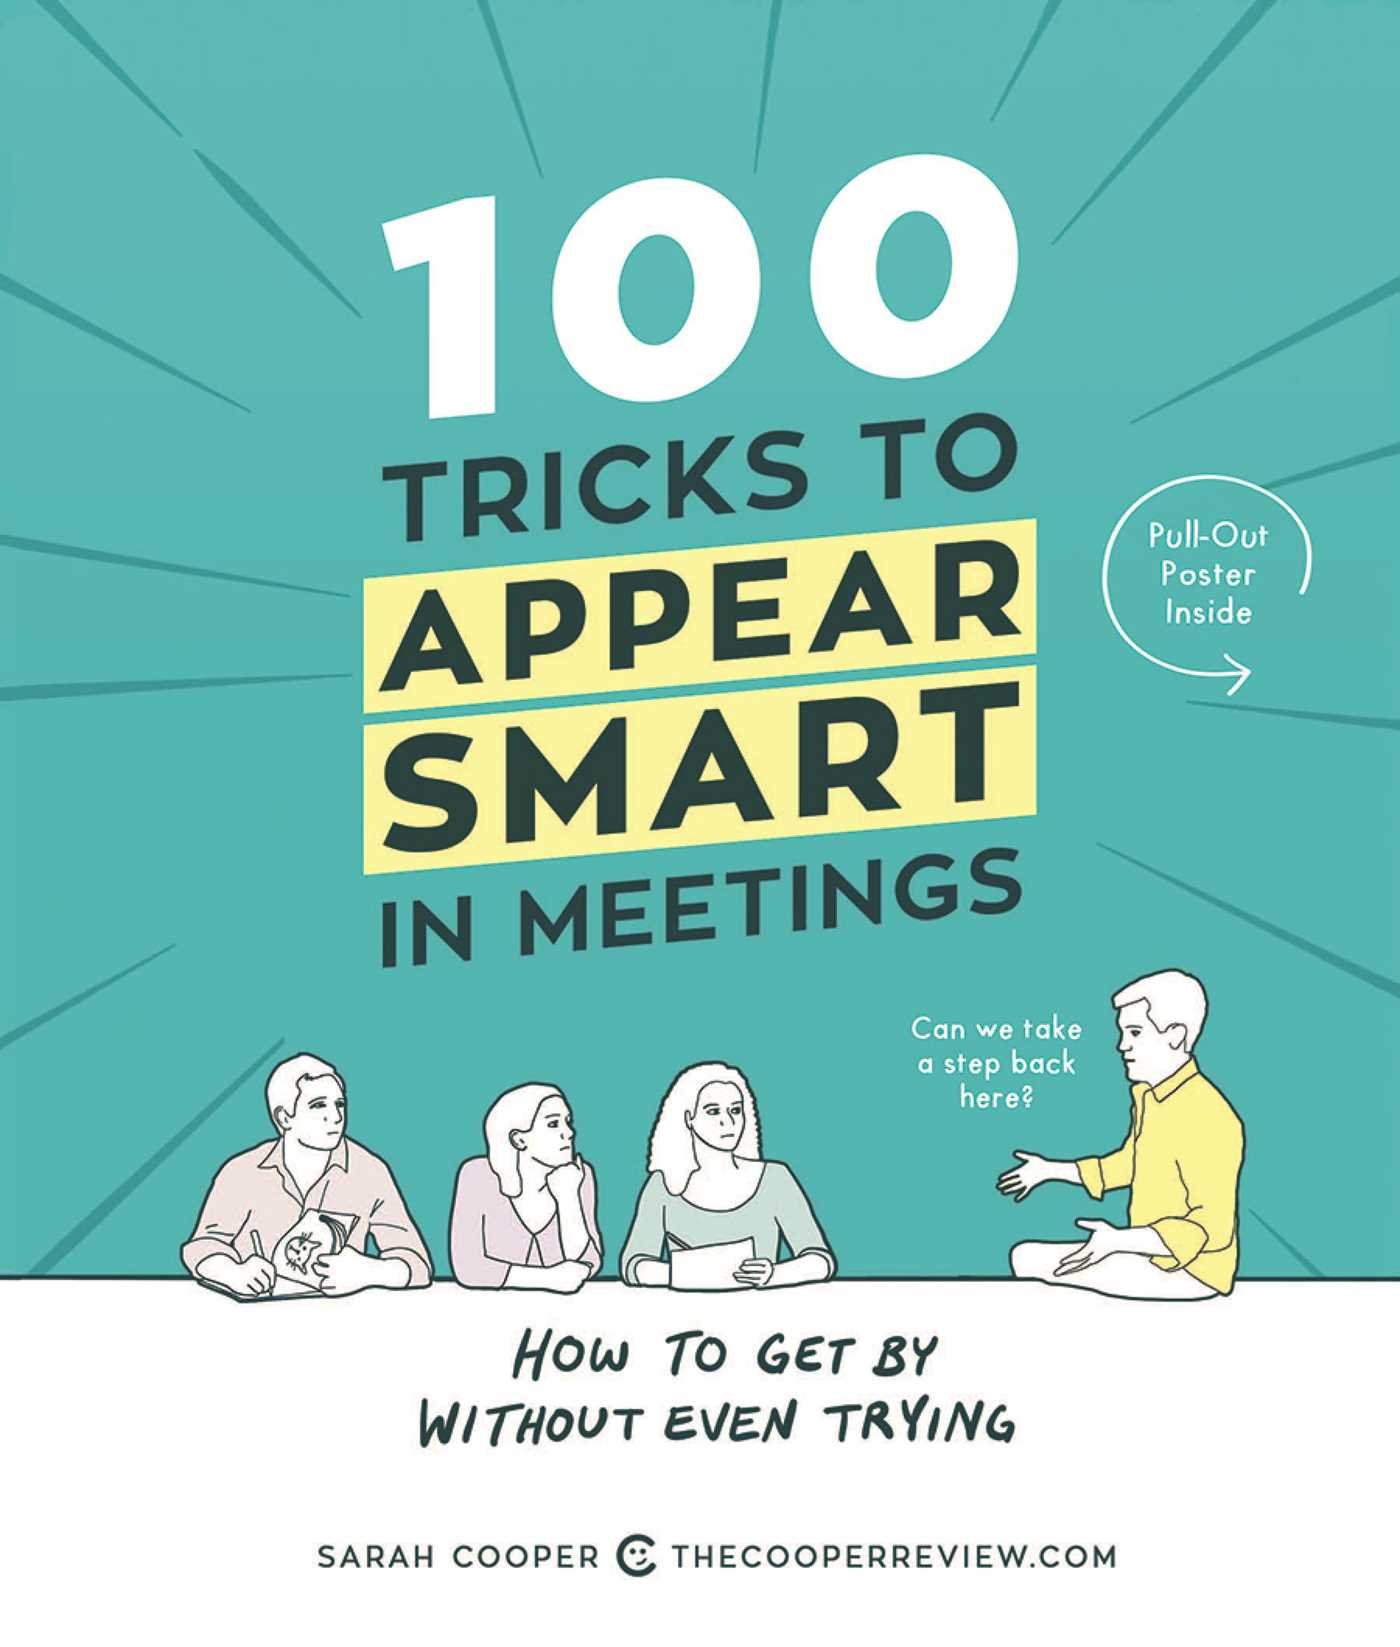 100 Tricks to Appear Smart in Meetings Get By Without Even Trying